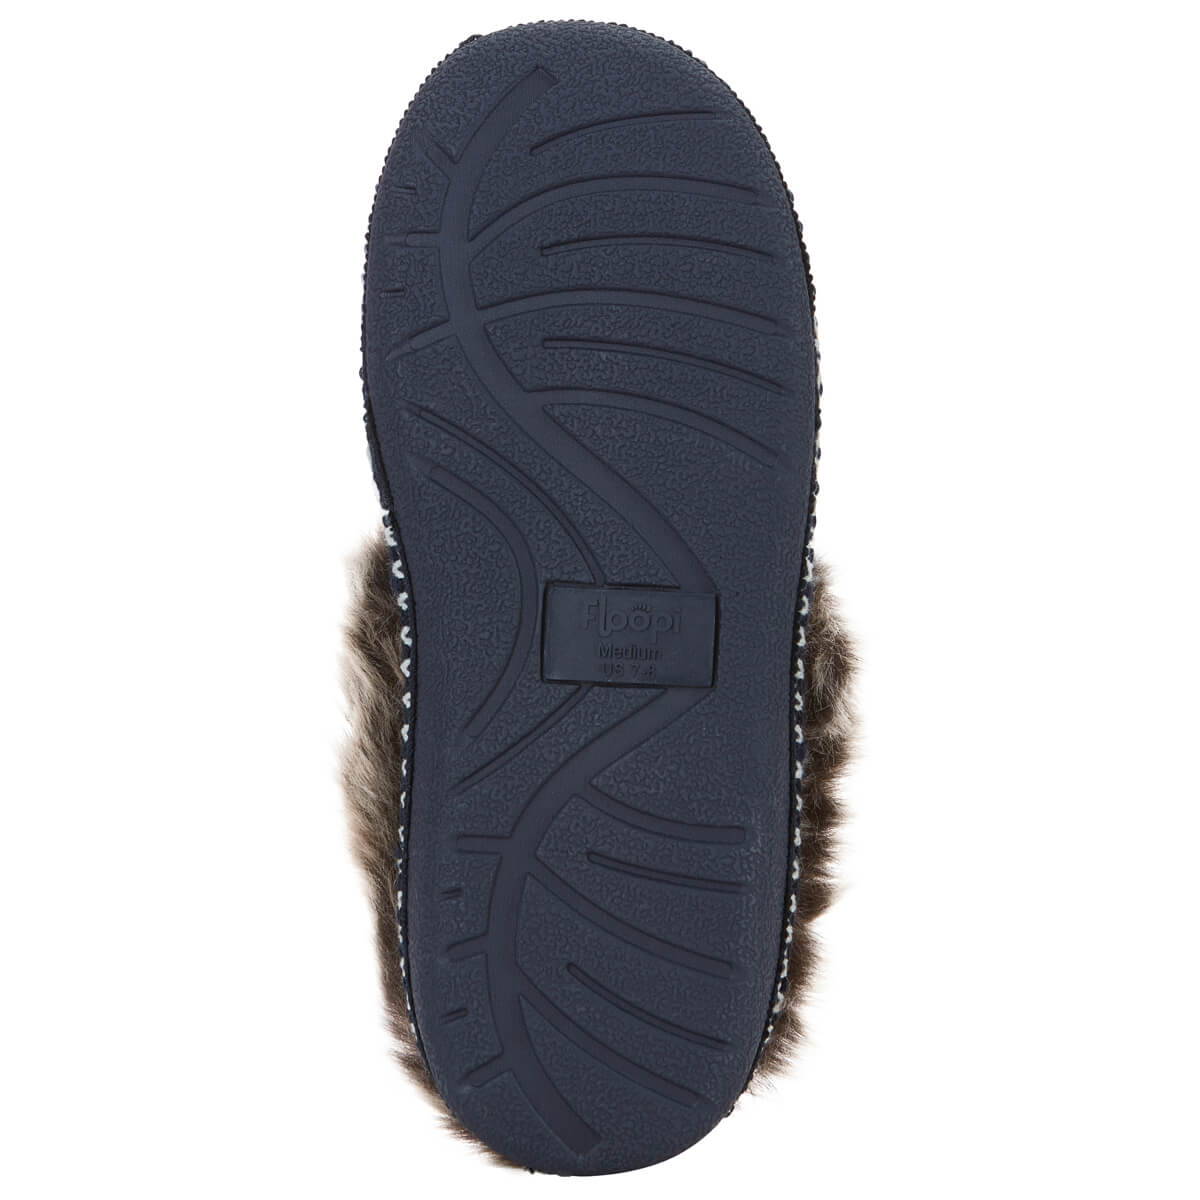 Floopi.com | Women’s Selene Faux Suede with Aztec Trim Clog Slippers